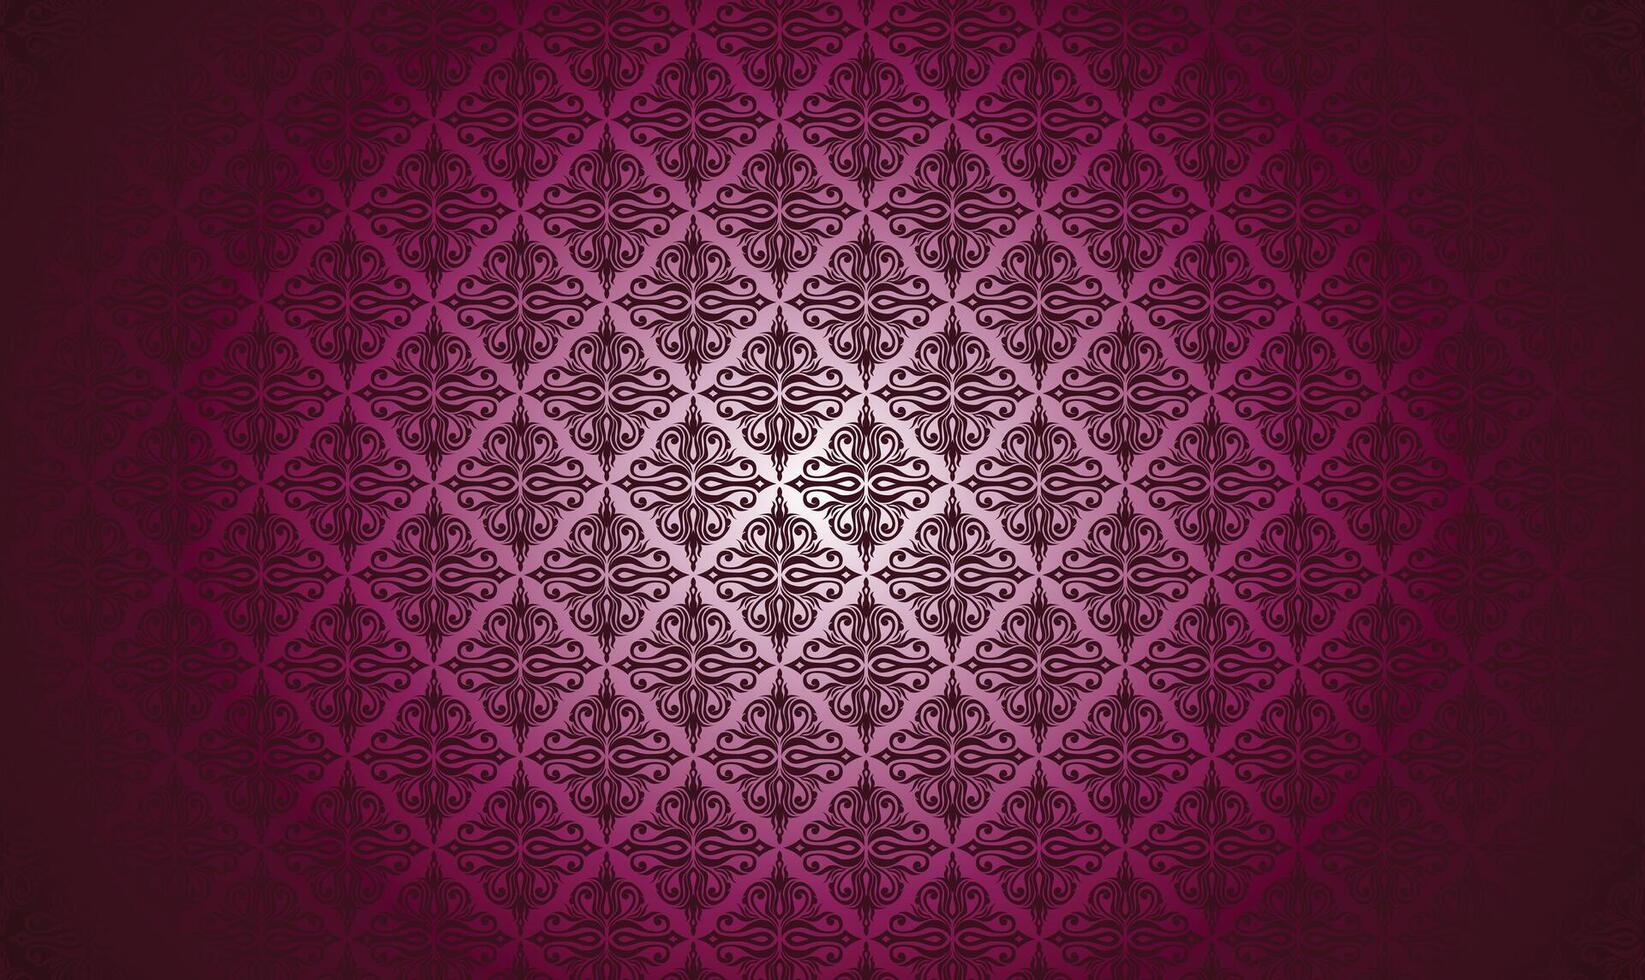 pink luxury background with ornamental elements vector